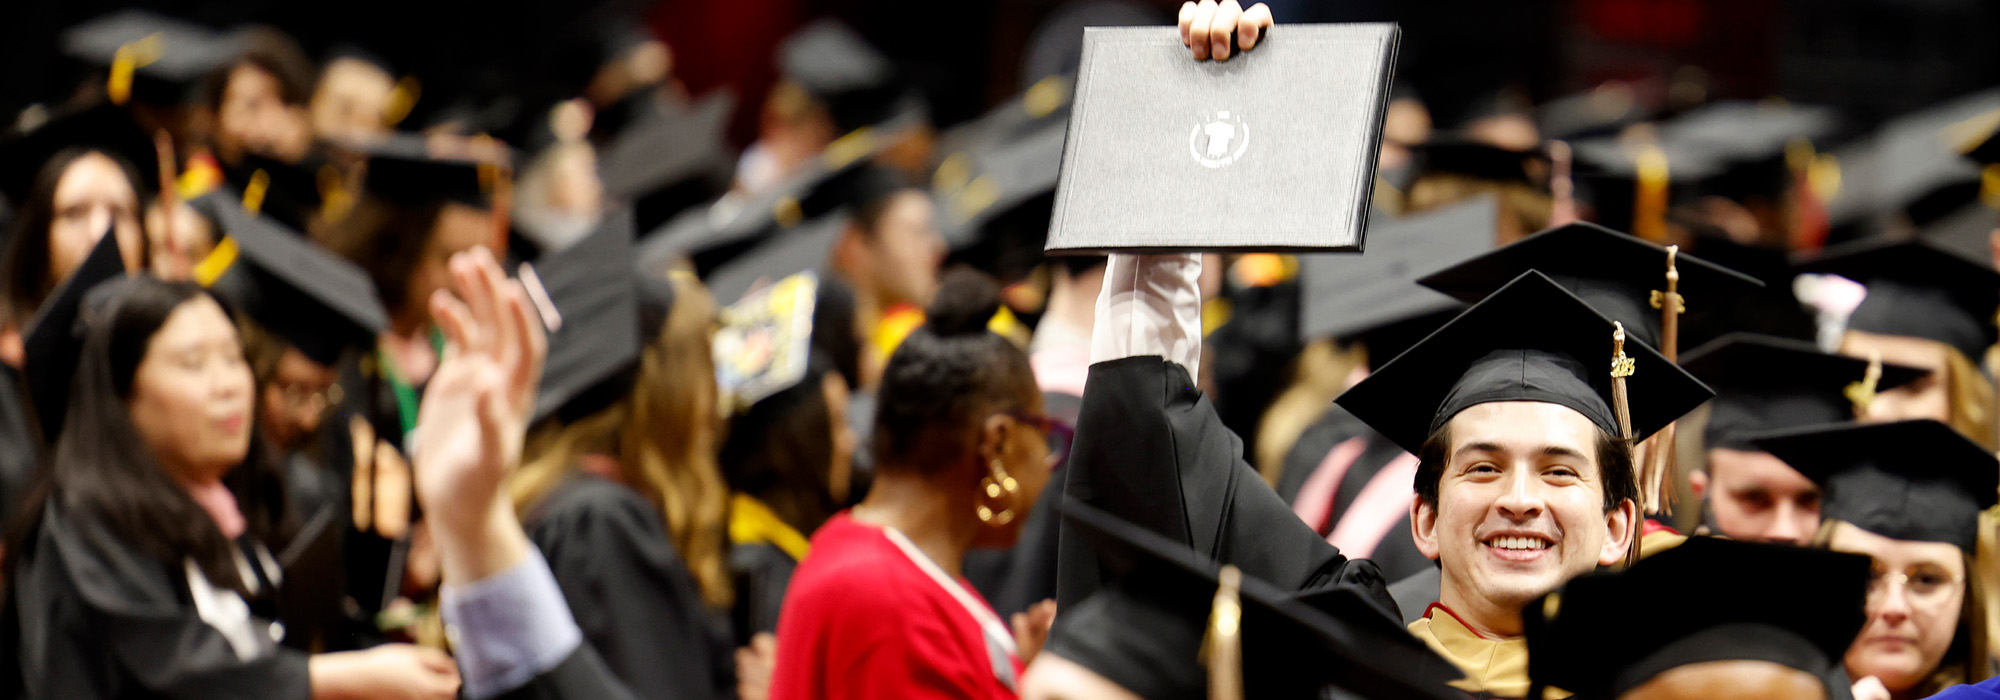 A graduate holds up their diploma cover after the ceremony among a crowd of other graduates.